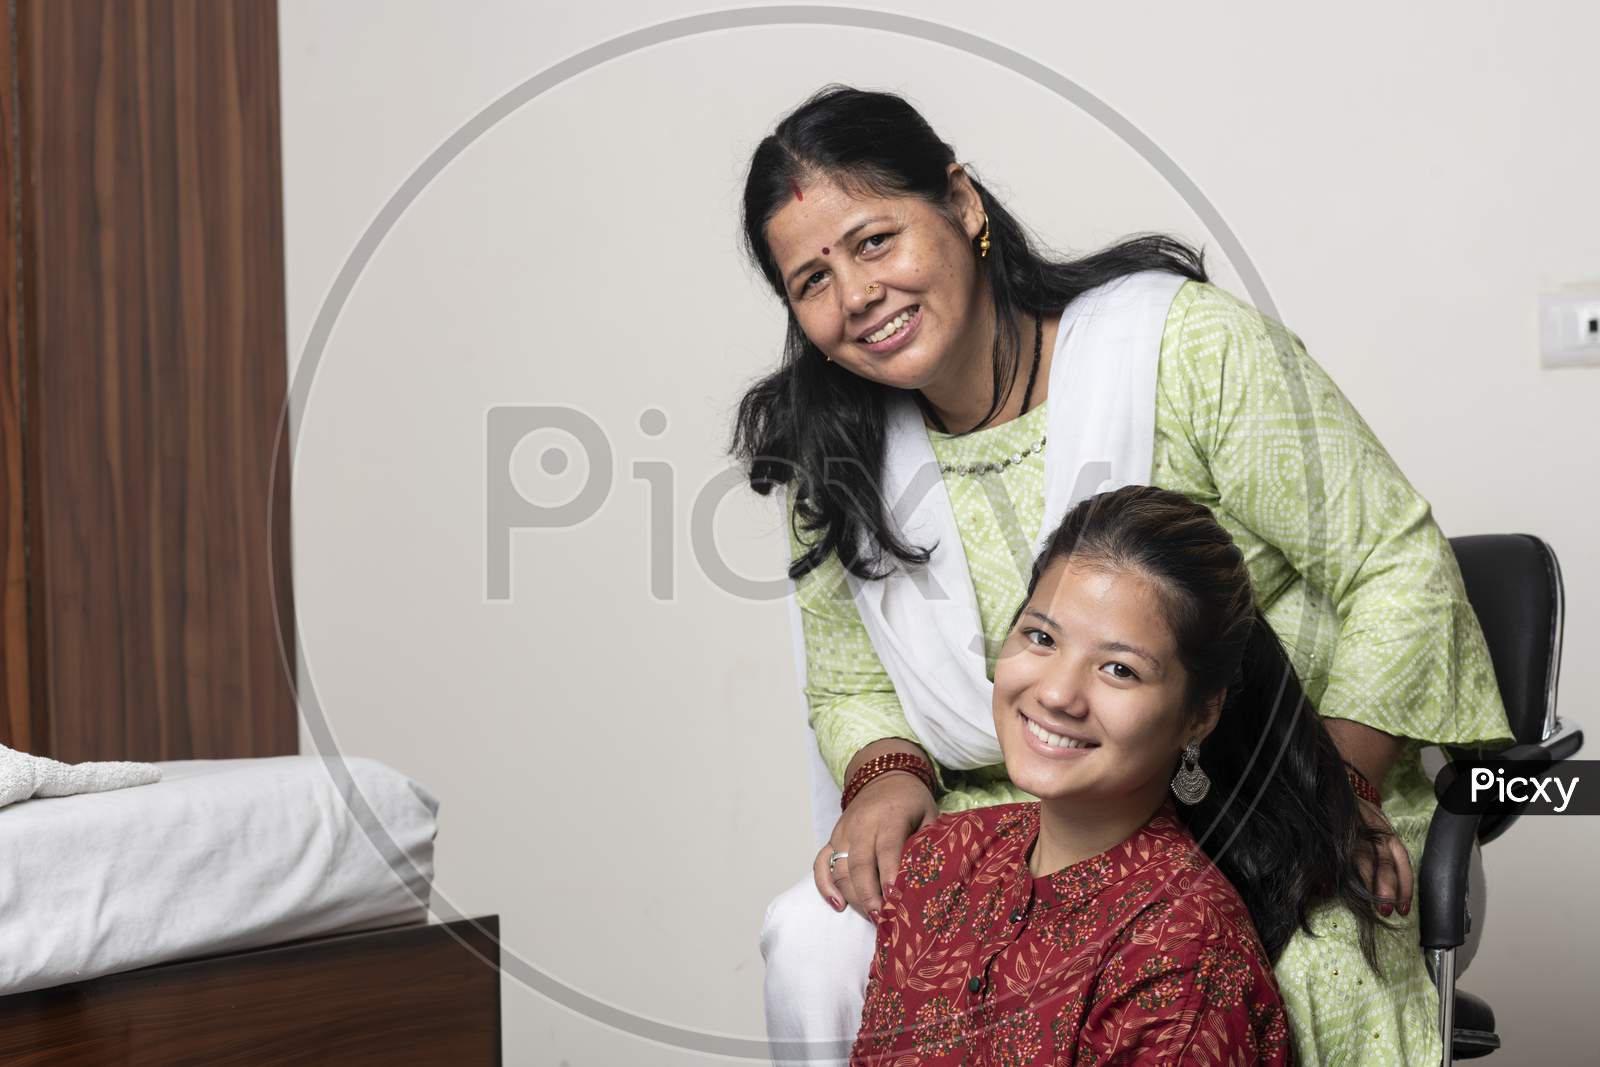 Portrait Of A Young Indian Girl Having Fun With Her Mother, Posing Towards The Camera With Her Mother.